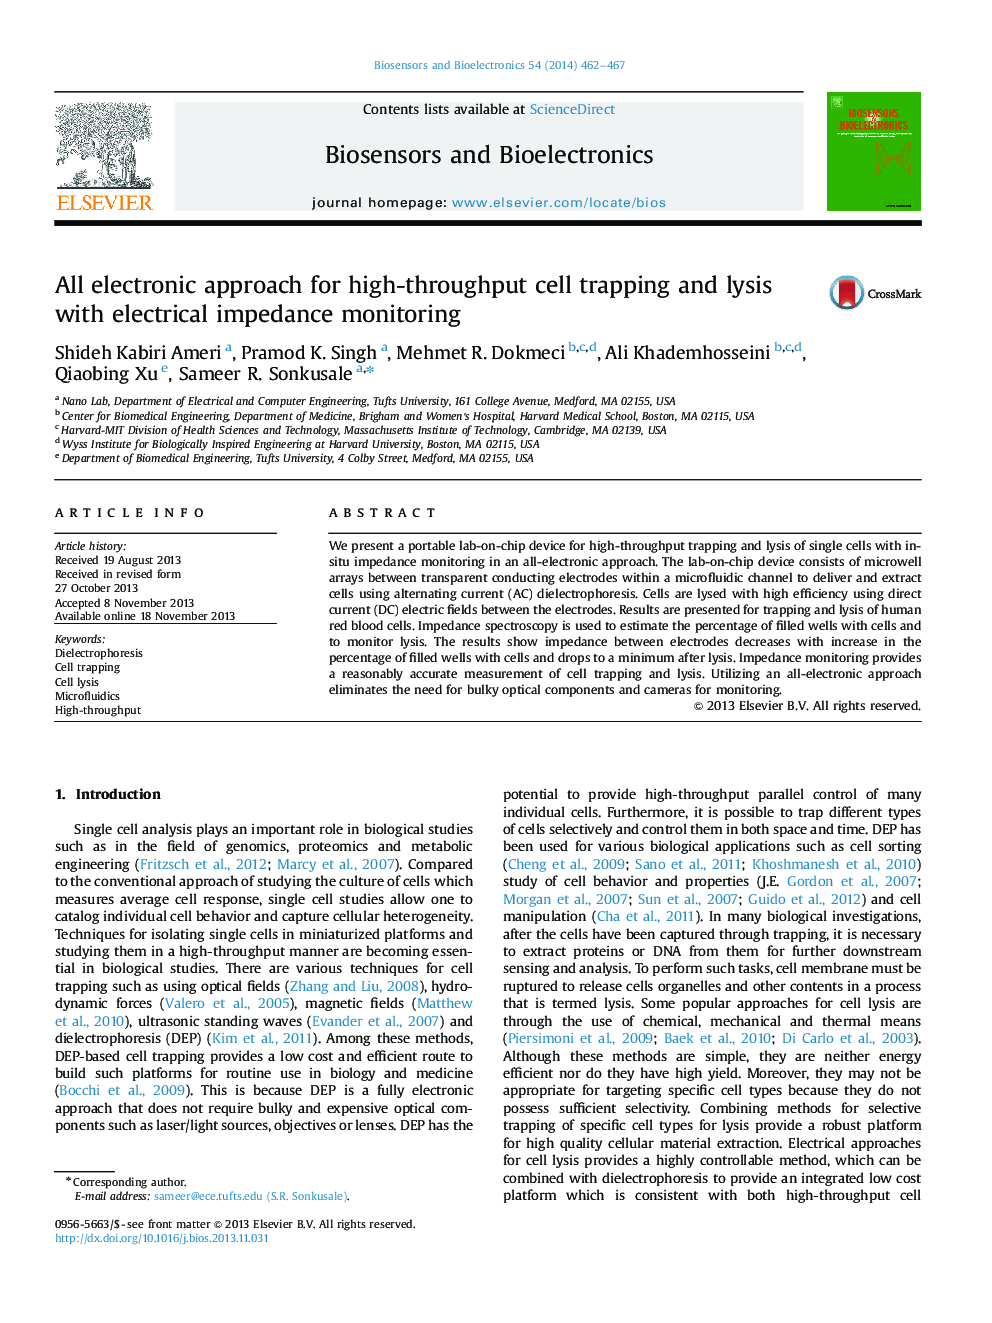 All electronic approach for high-throughput cell trapping and lysis with electrical impedance monitoring